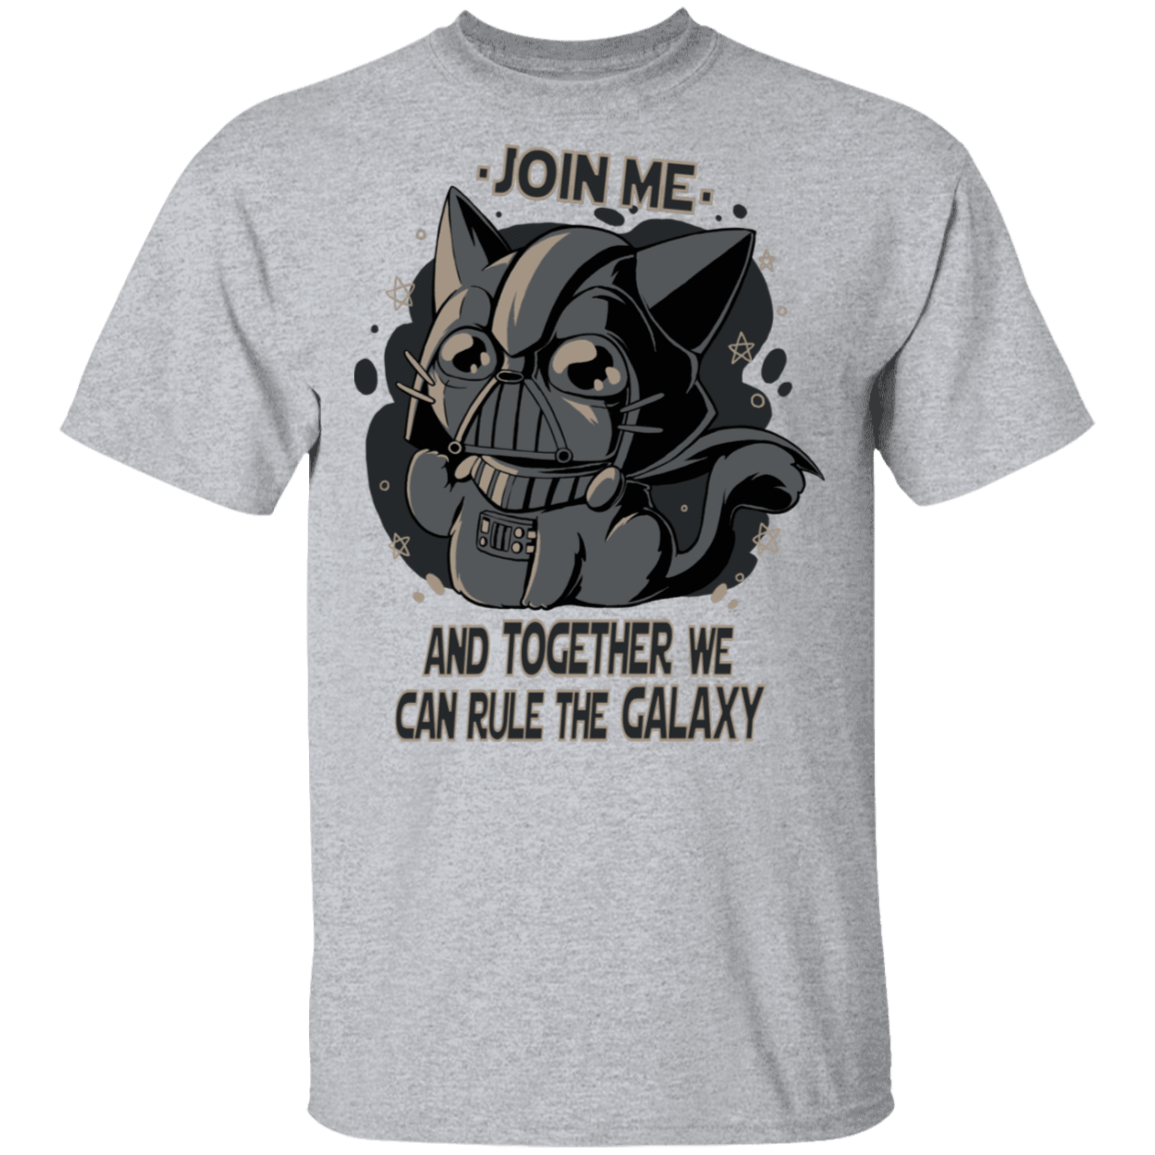 T-Shirts Sport Grey / S Join Me T-Shirt